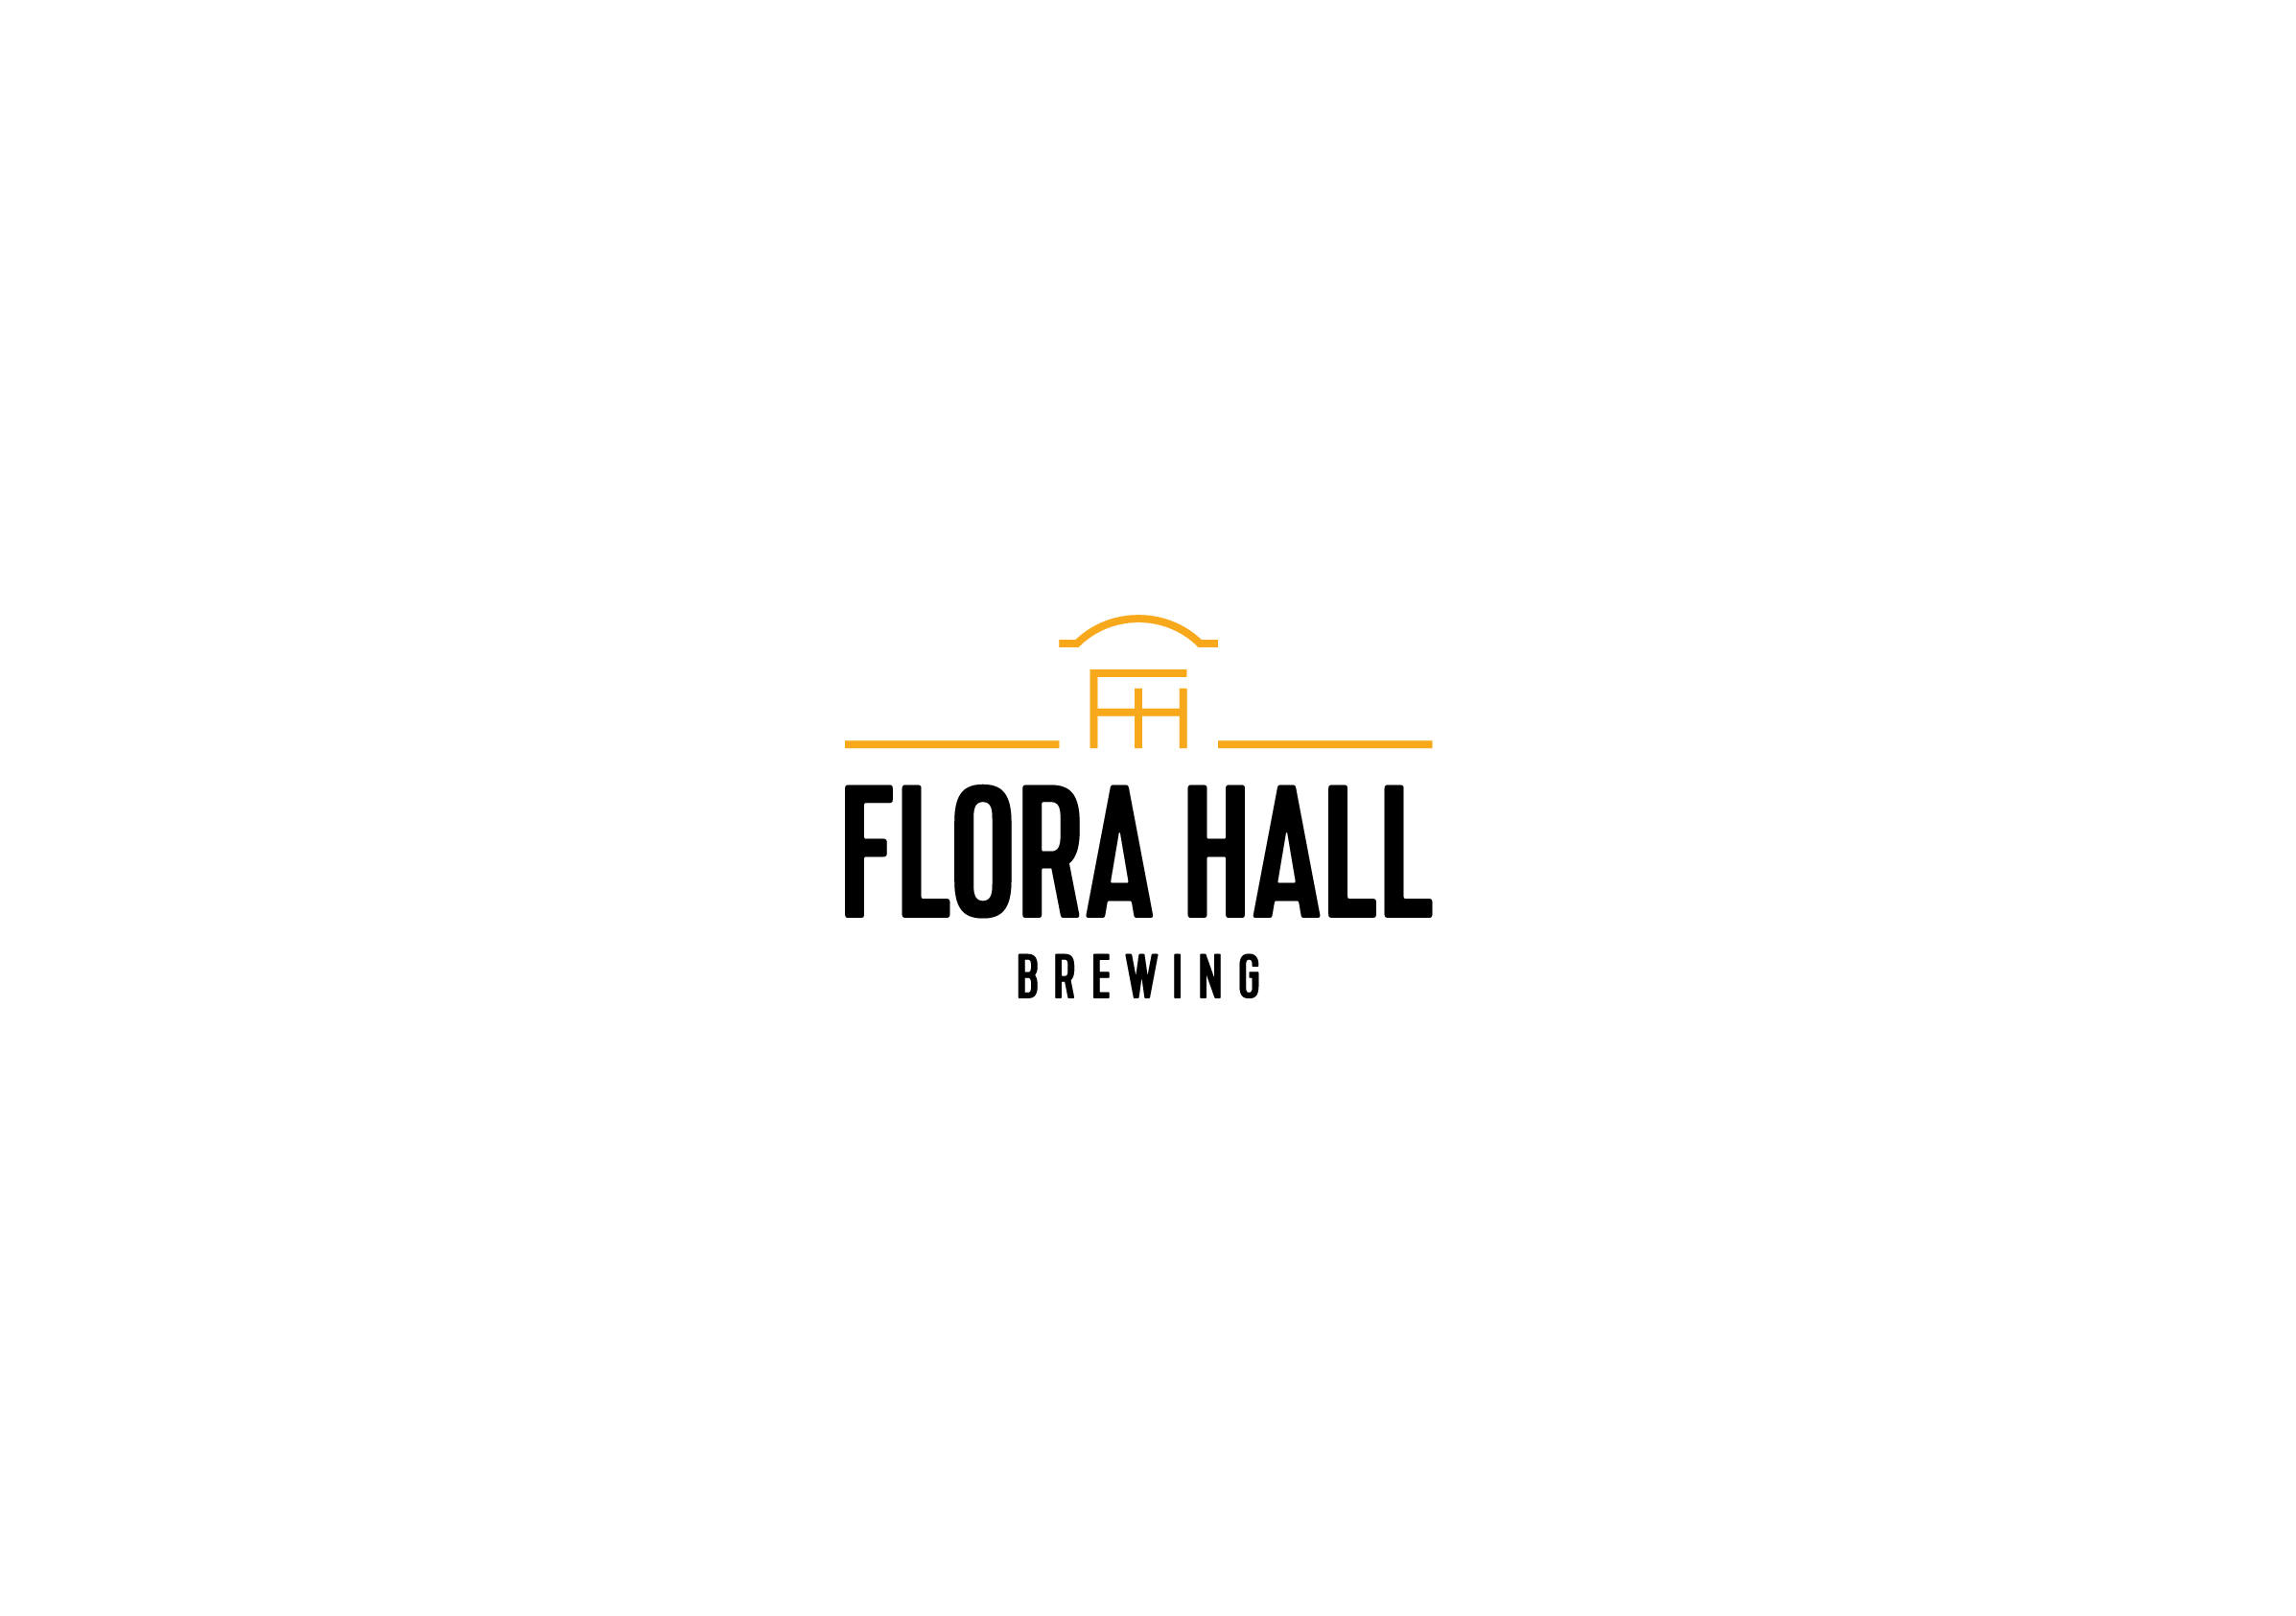 Hall Logo - Flora Hall Brewing: Branding for Ottawa brewery and kitchen